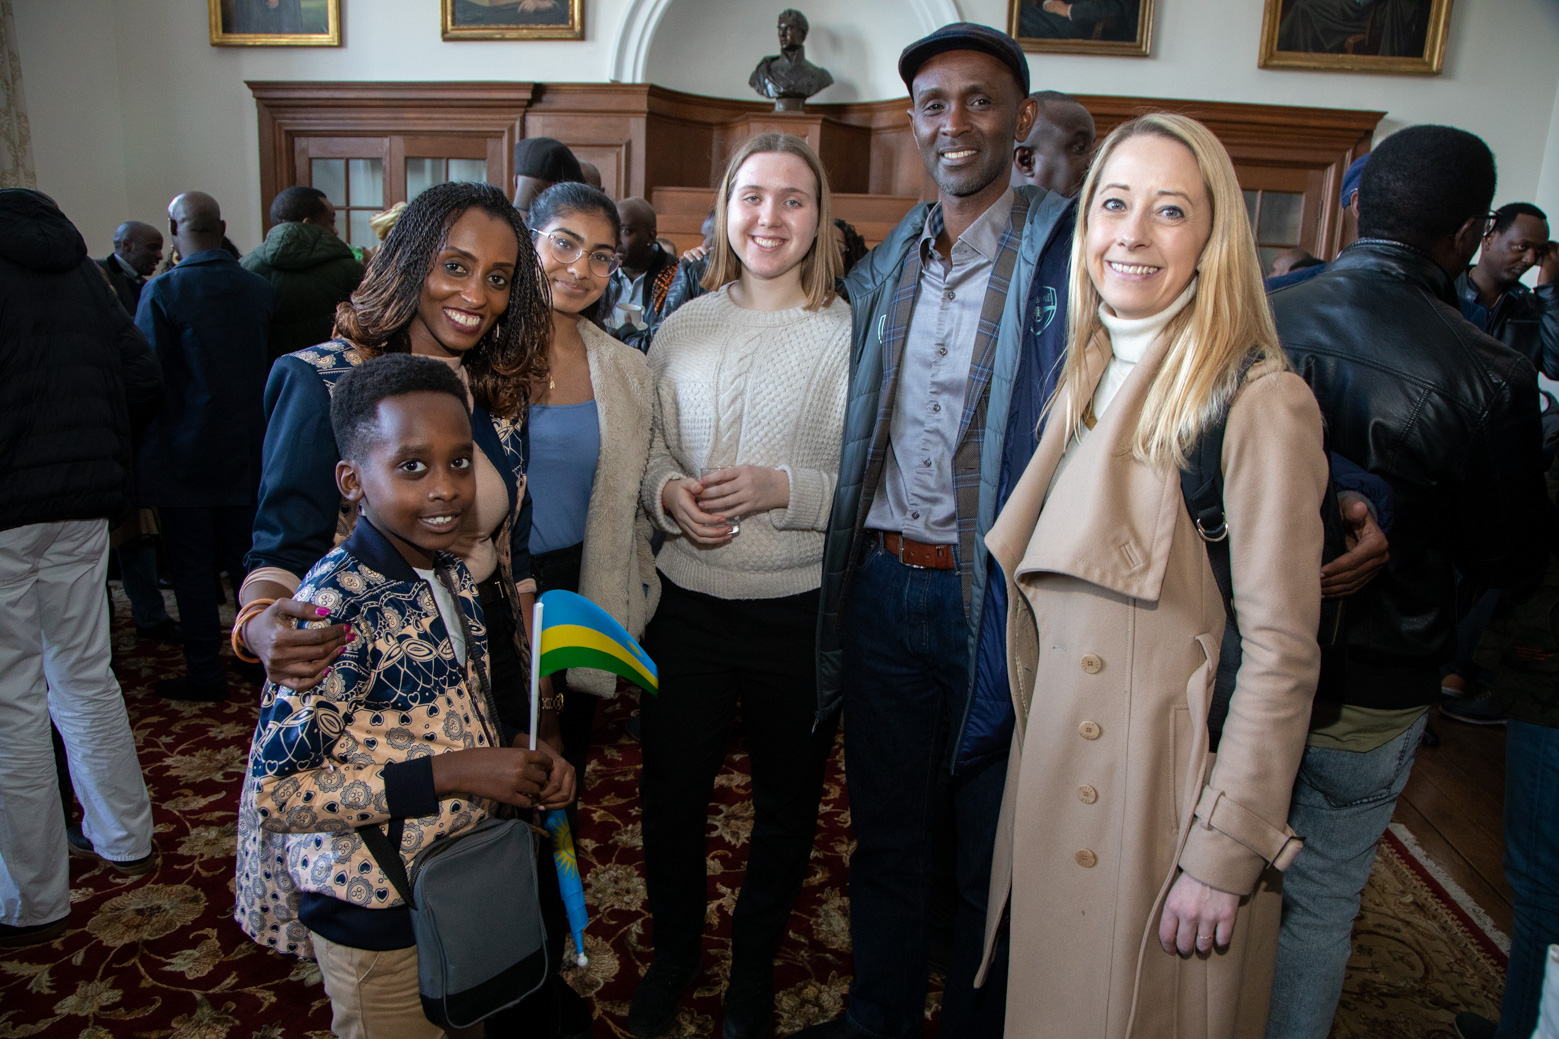 Members of the Rwandan Diaspora, young and old, came together to mark Heroes' Day in London.